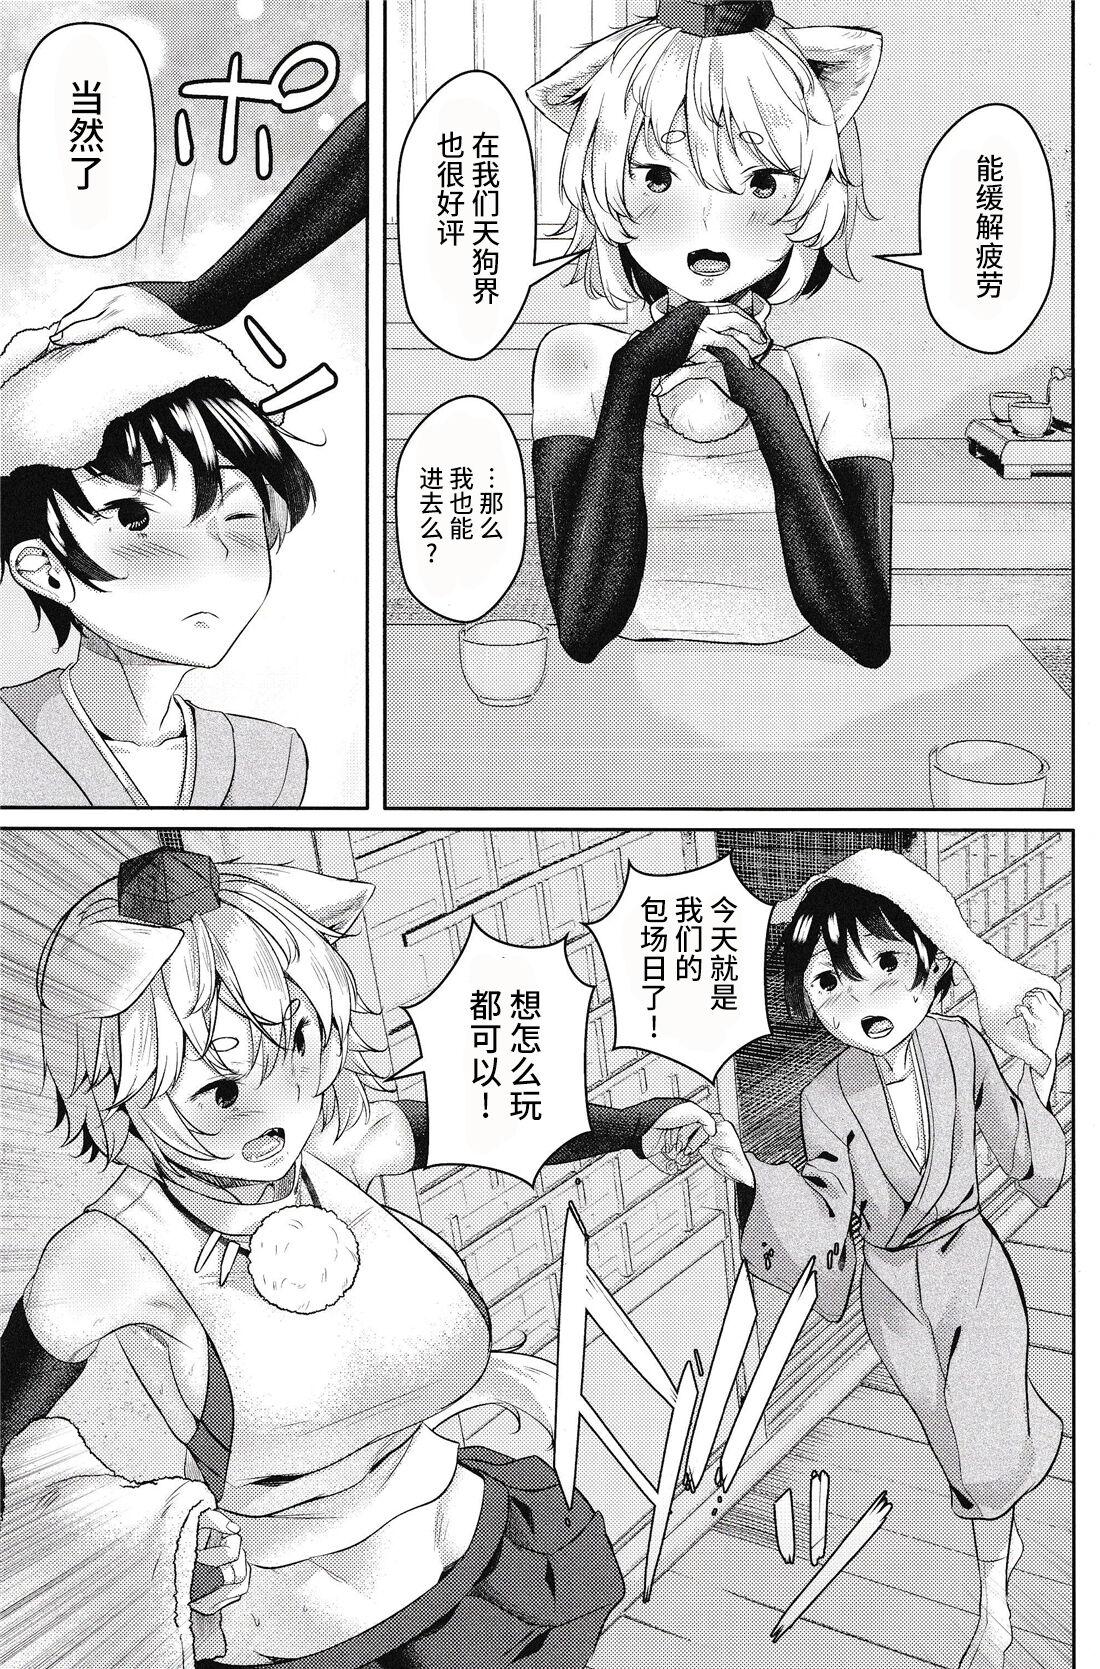 Transgender 犬のお姉ちゃんと温泉旅行 - Touhou project Vip - Page 5